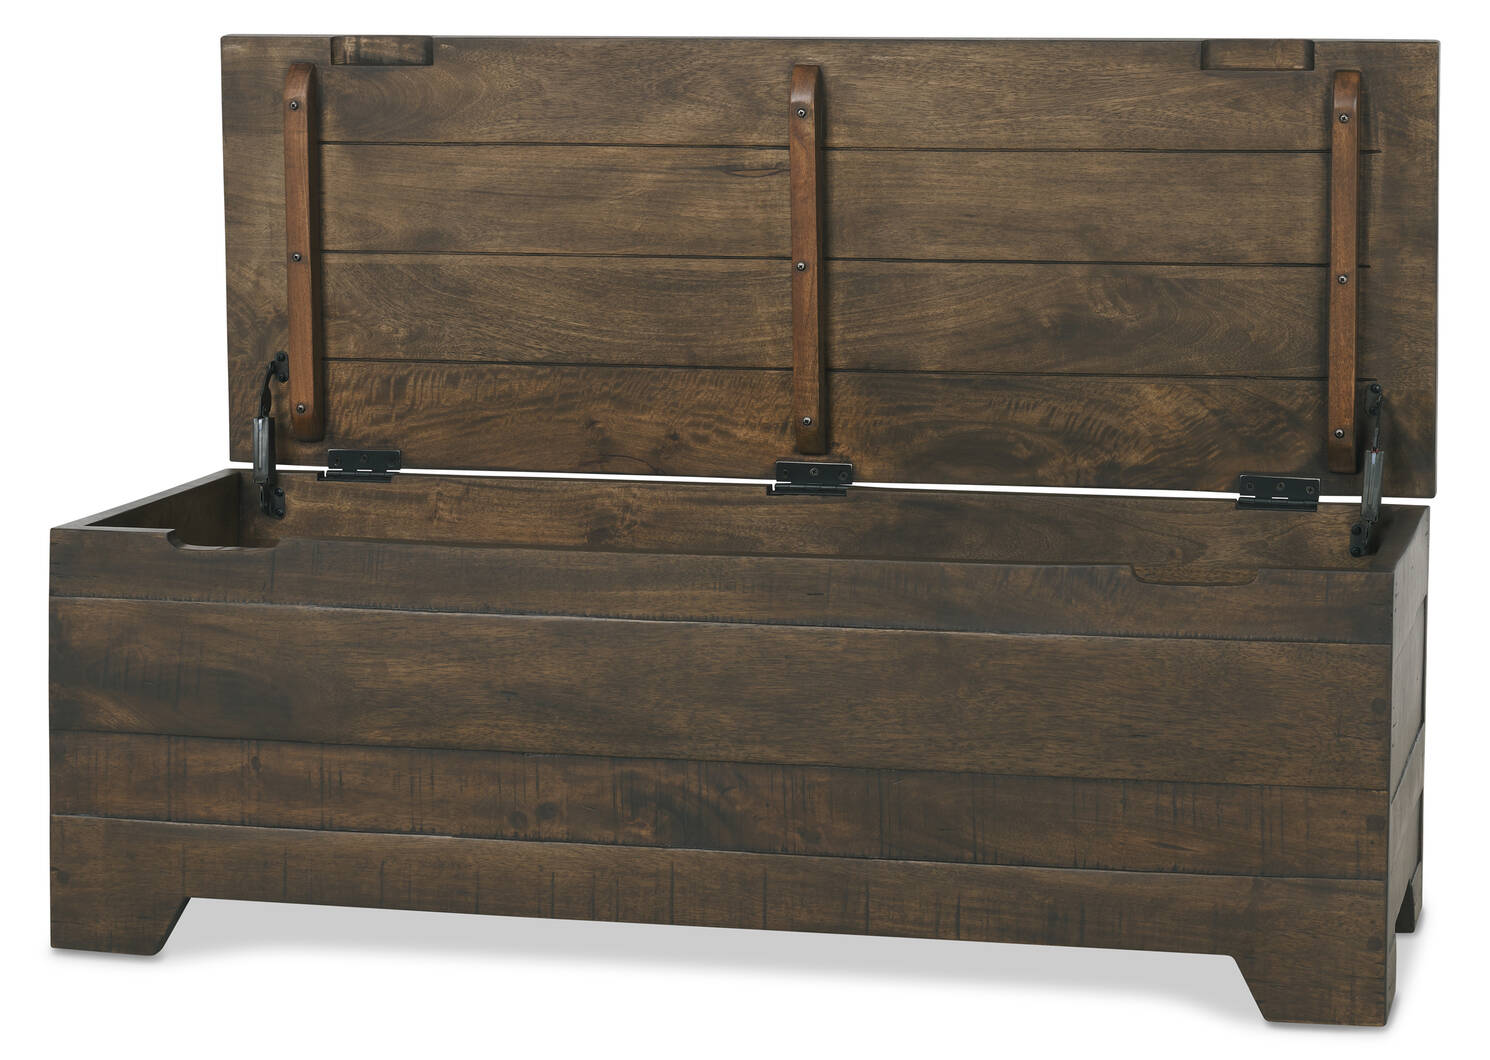 Clifton Trunk Coffee Table -Gage Spice